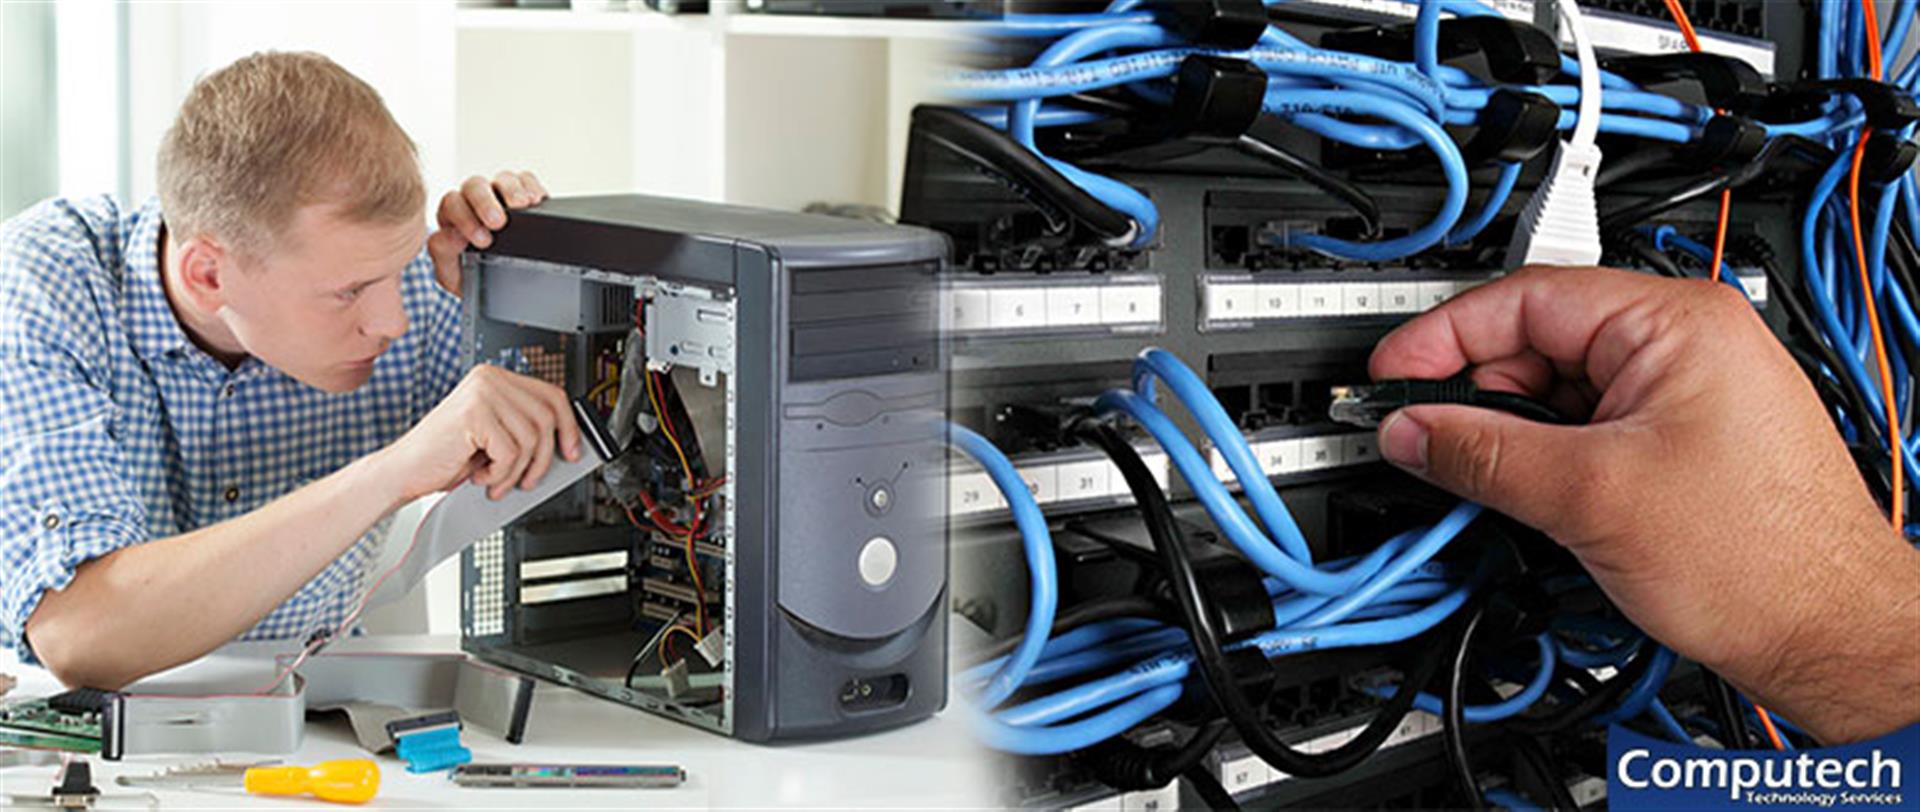 Richmond Virginia Onsite Computer & Printer Repairs, Networks, Voice & Data Cabling Solutions